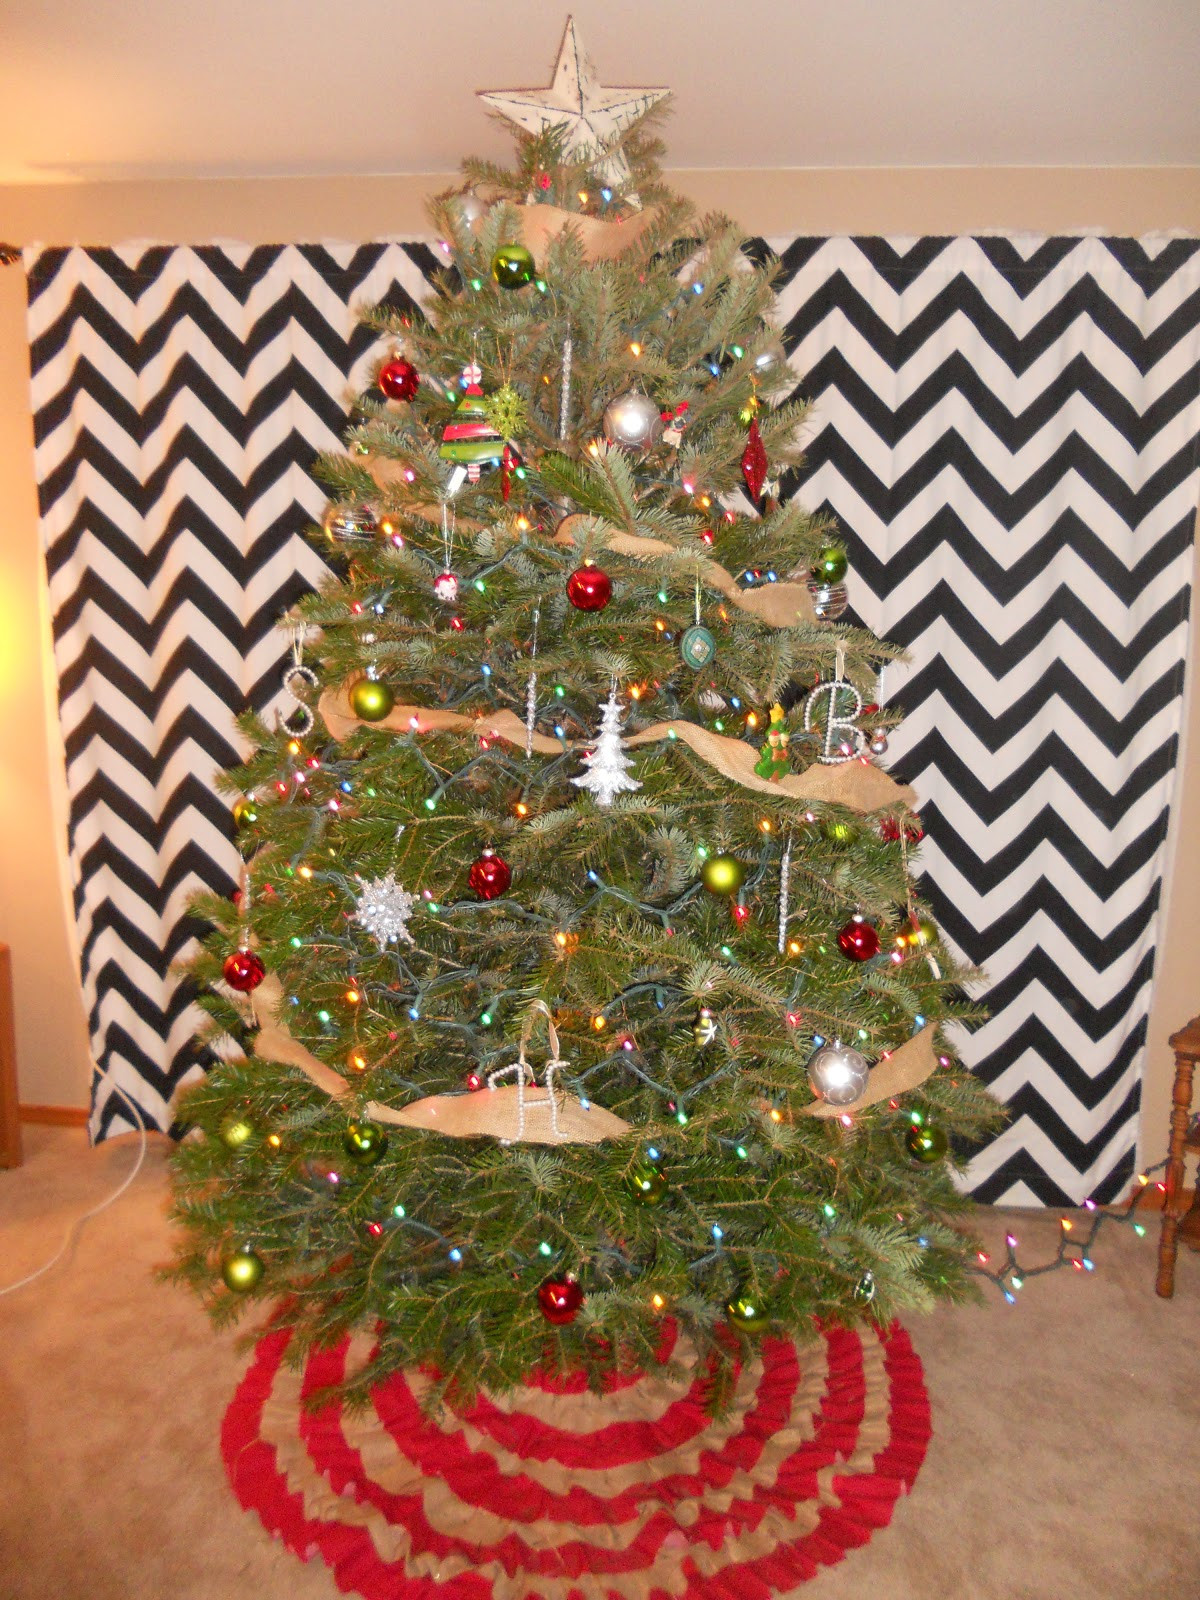 DIY Christmas Tree Skirt
 Woman In Transition DIY Christmas Tree Skirt